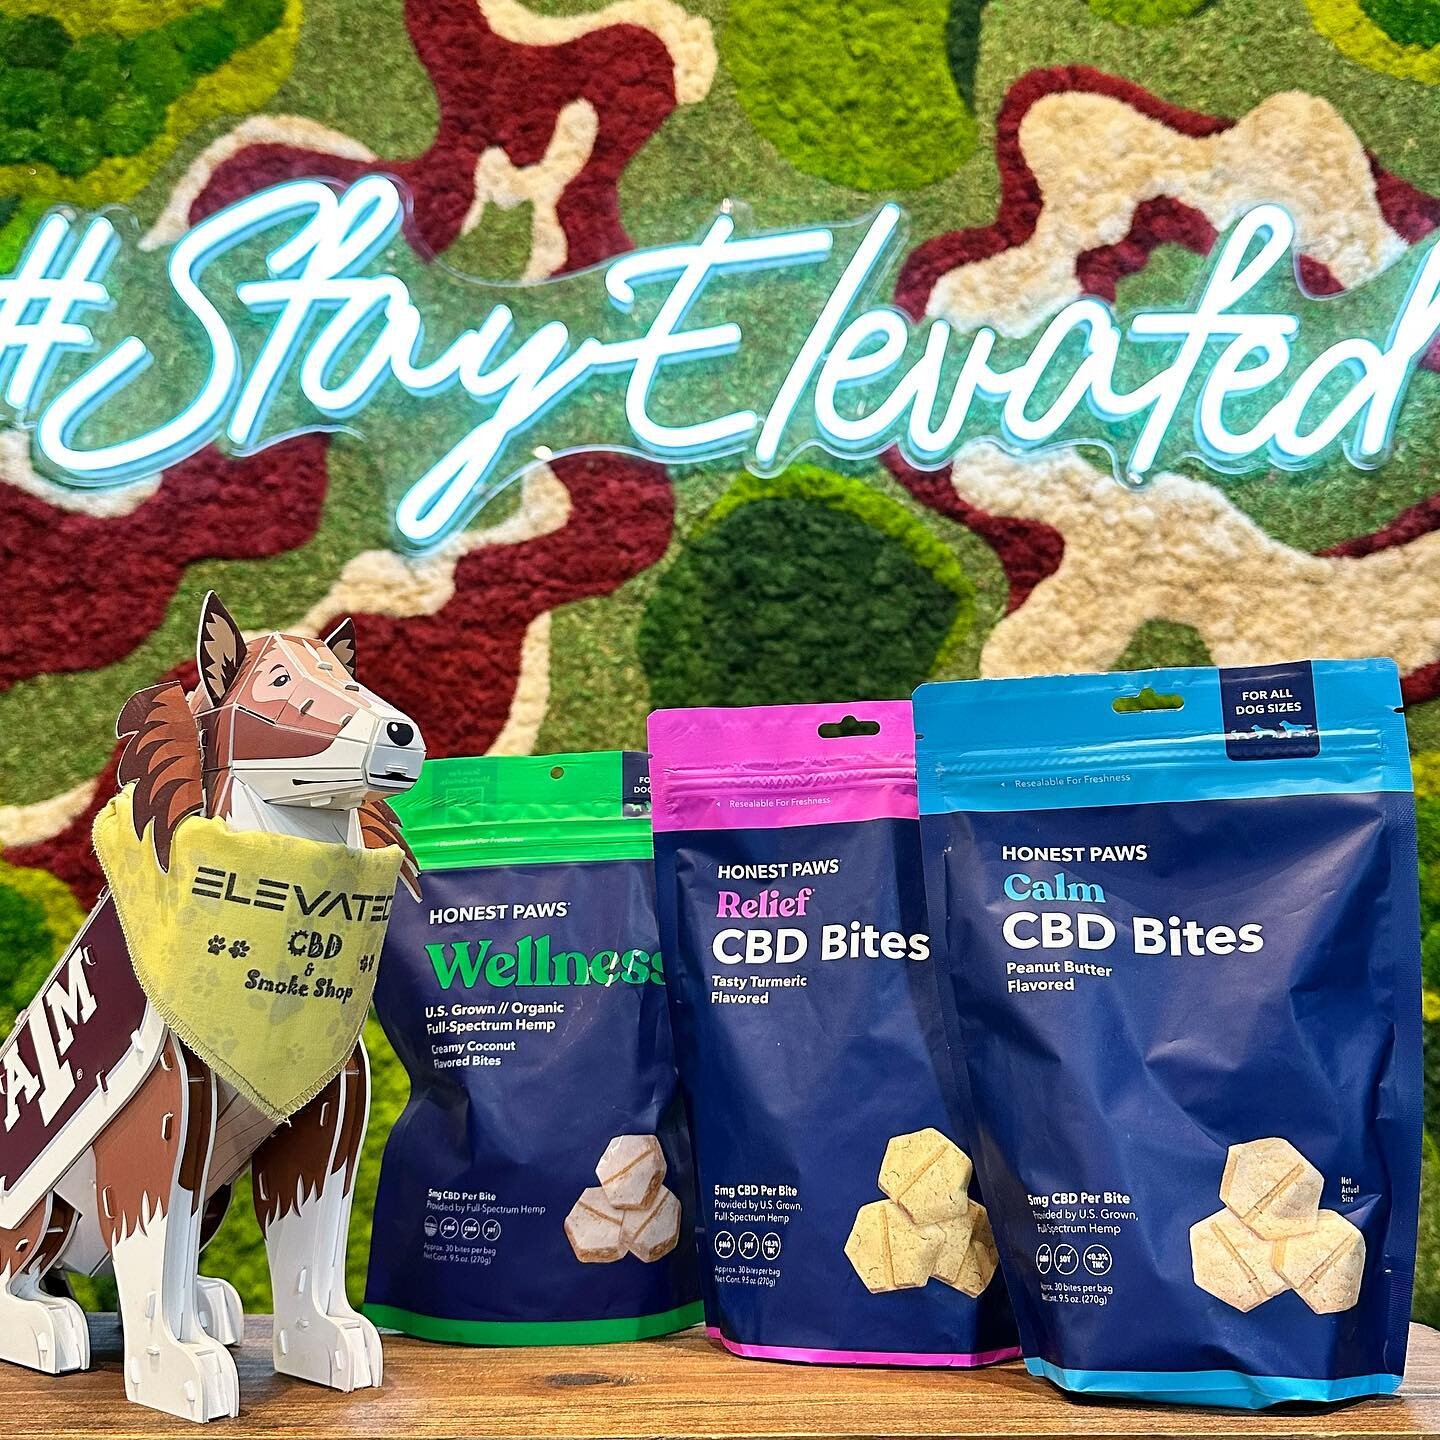 Your local vendor of @honestpaws wellness pet products! 🐶🐱

Stop by ELEVATED and ask our knowledgeable staff about all things pet related! 

#StayElevated #Aggieland #CollegeStation #Aggie #CStat #TexasAM #Aggies #CollegeStationTX #BCS #TAMU #Texas